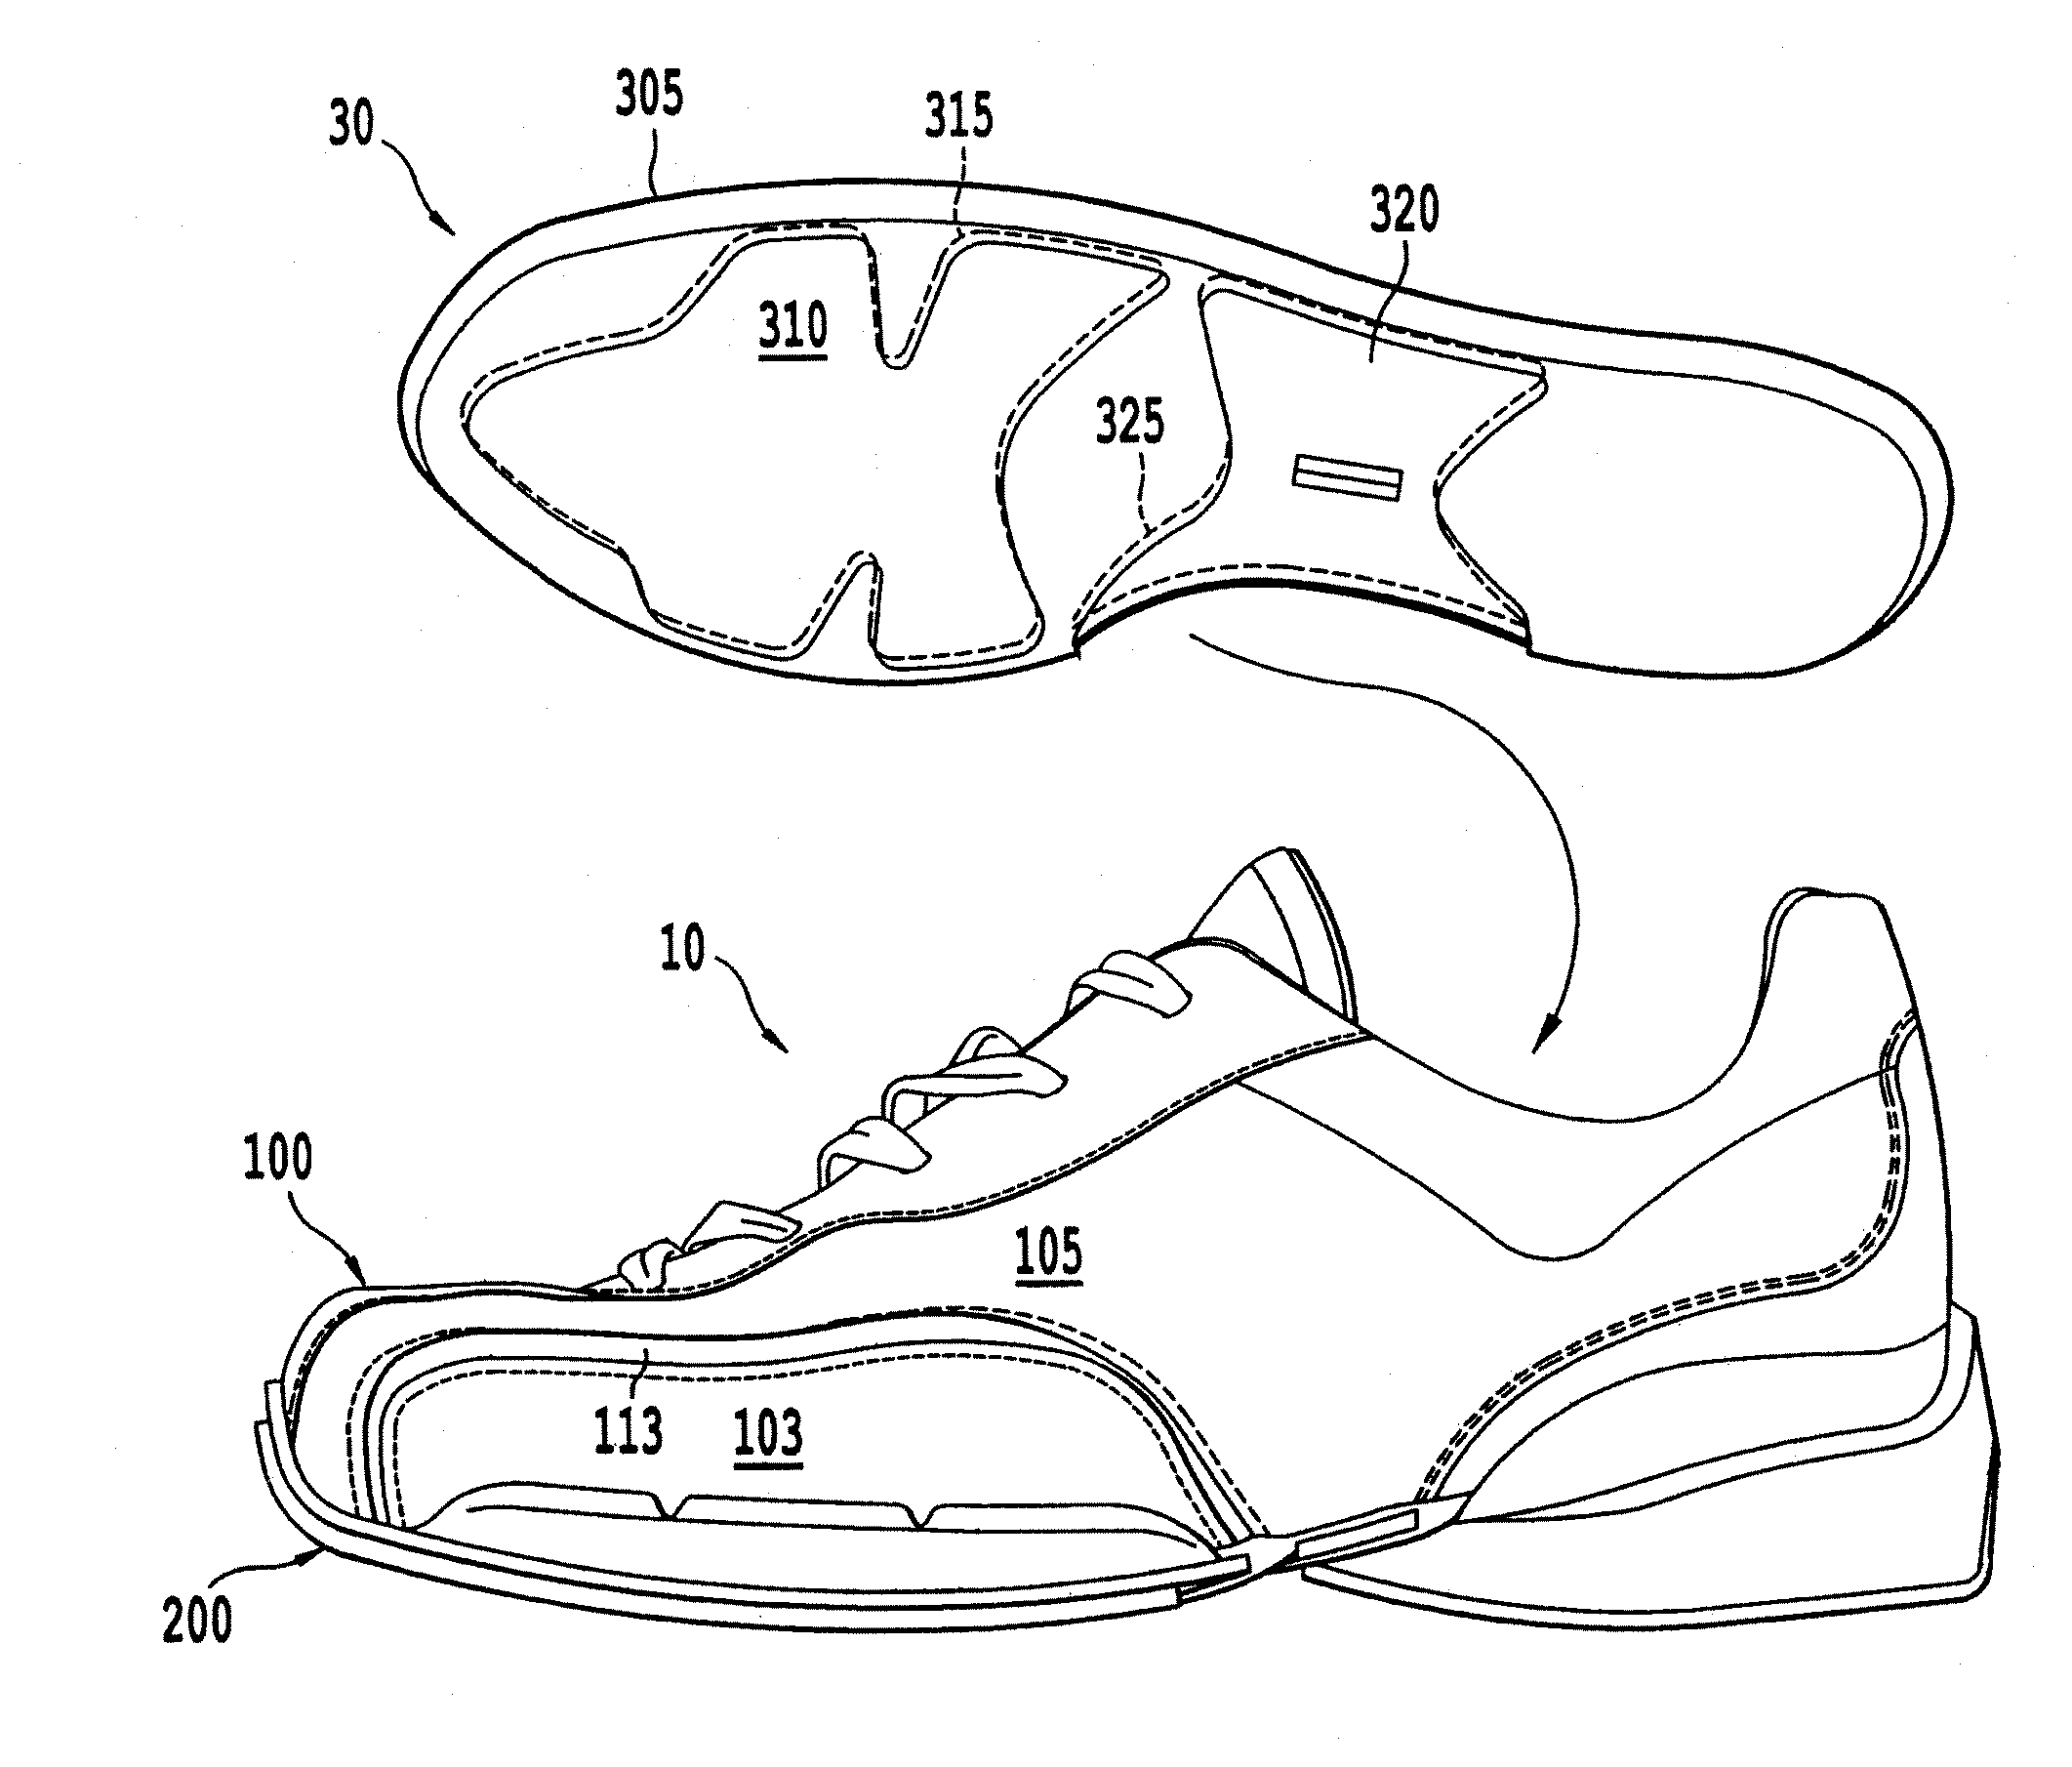 Adjustable arch support assembly